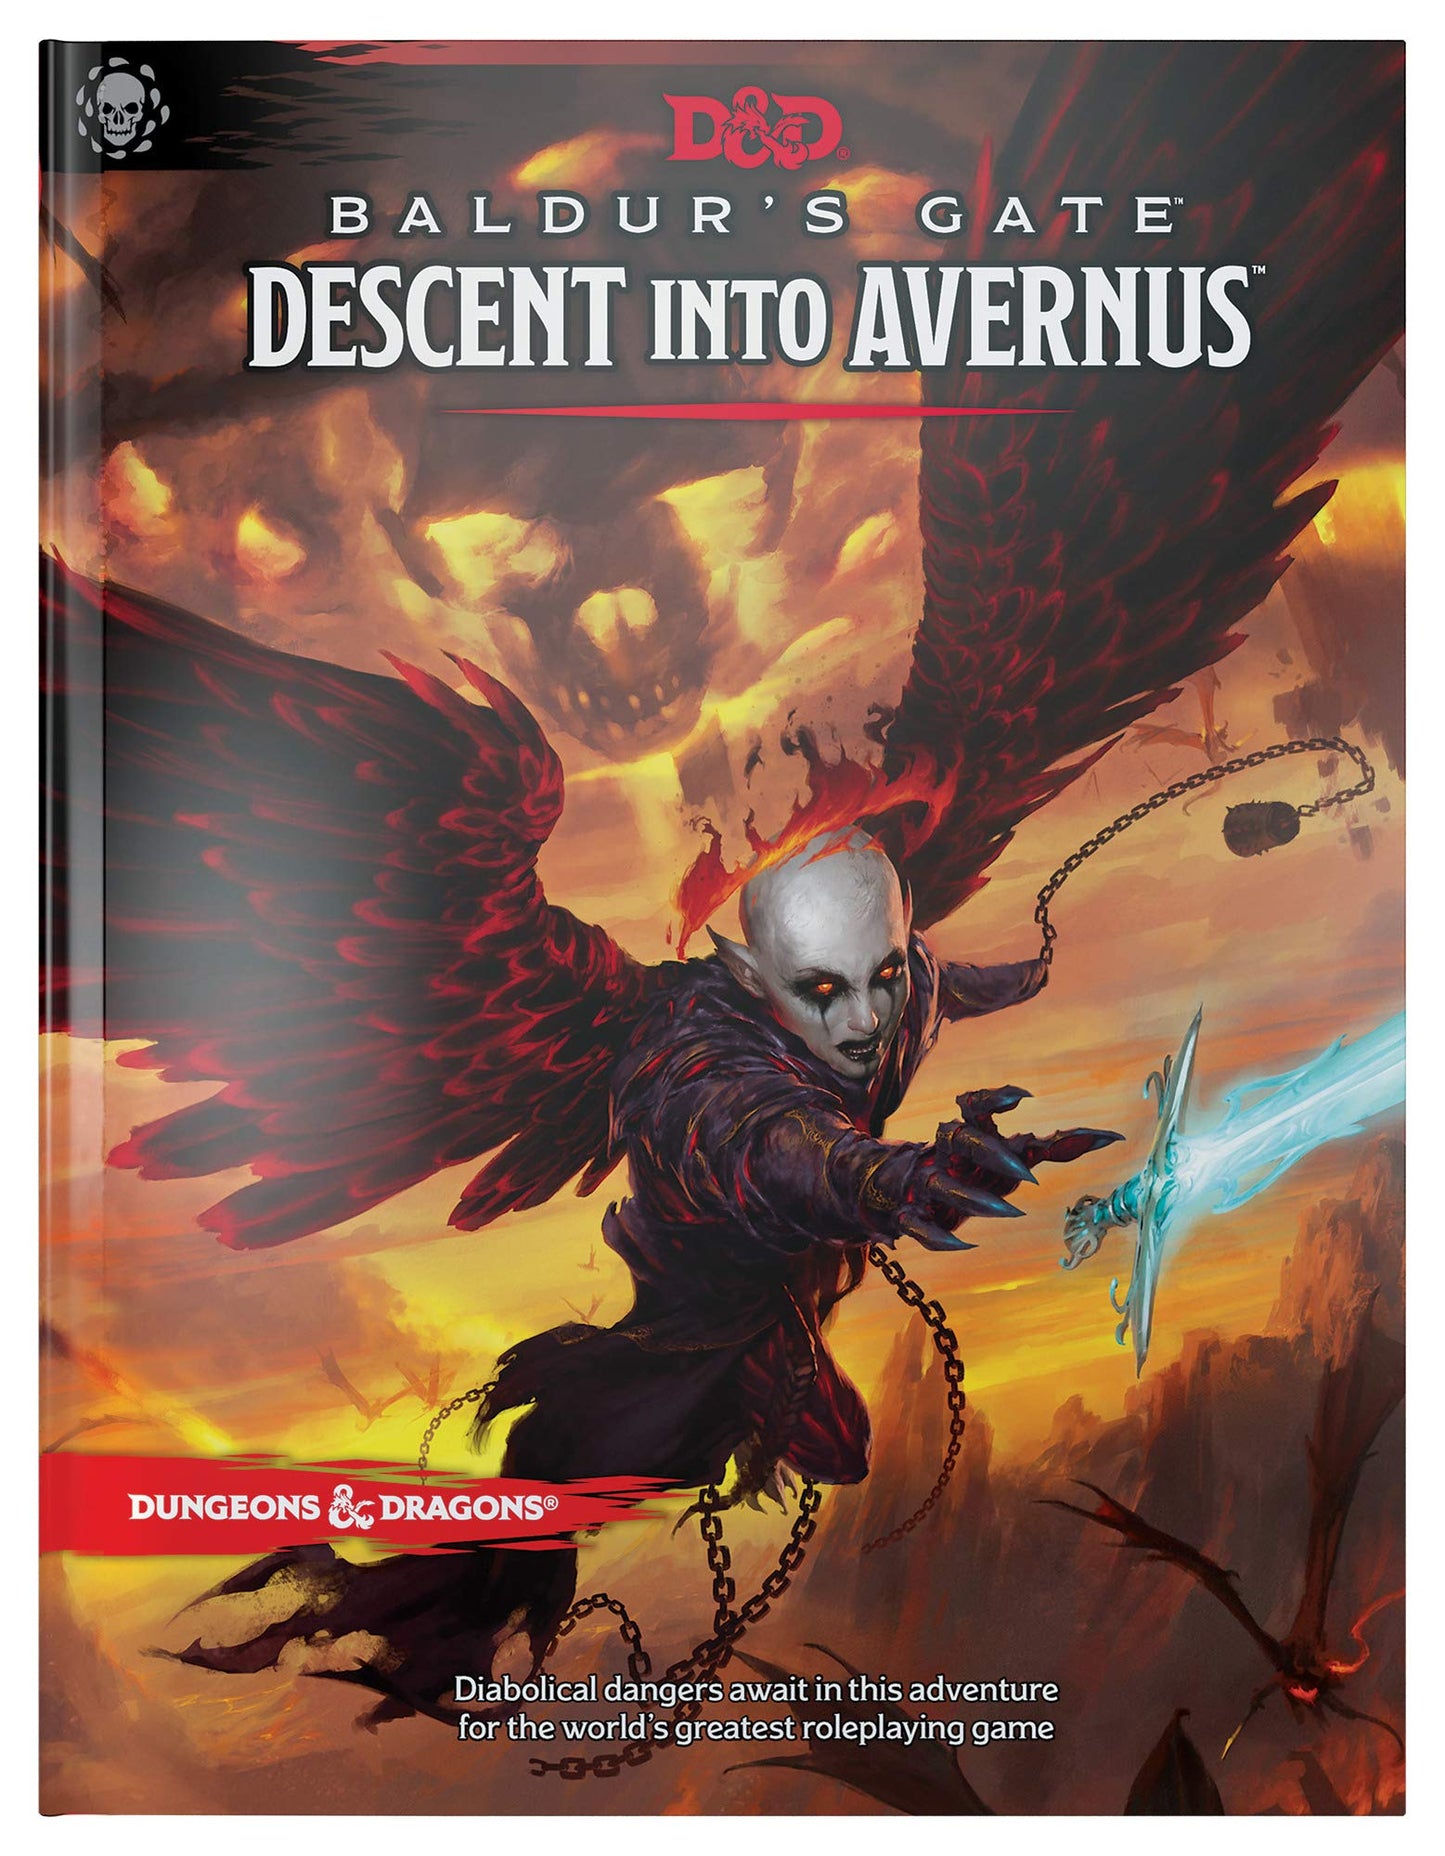 Dungeons and Dragons 5th Edition Adventure Balder's Gate Descent into Avernus